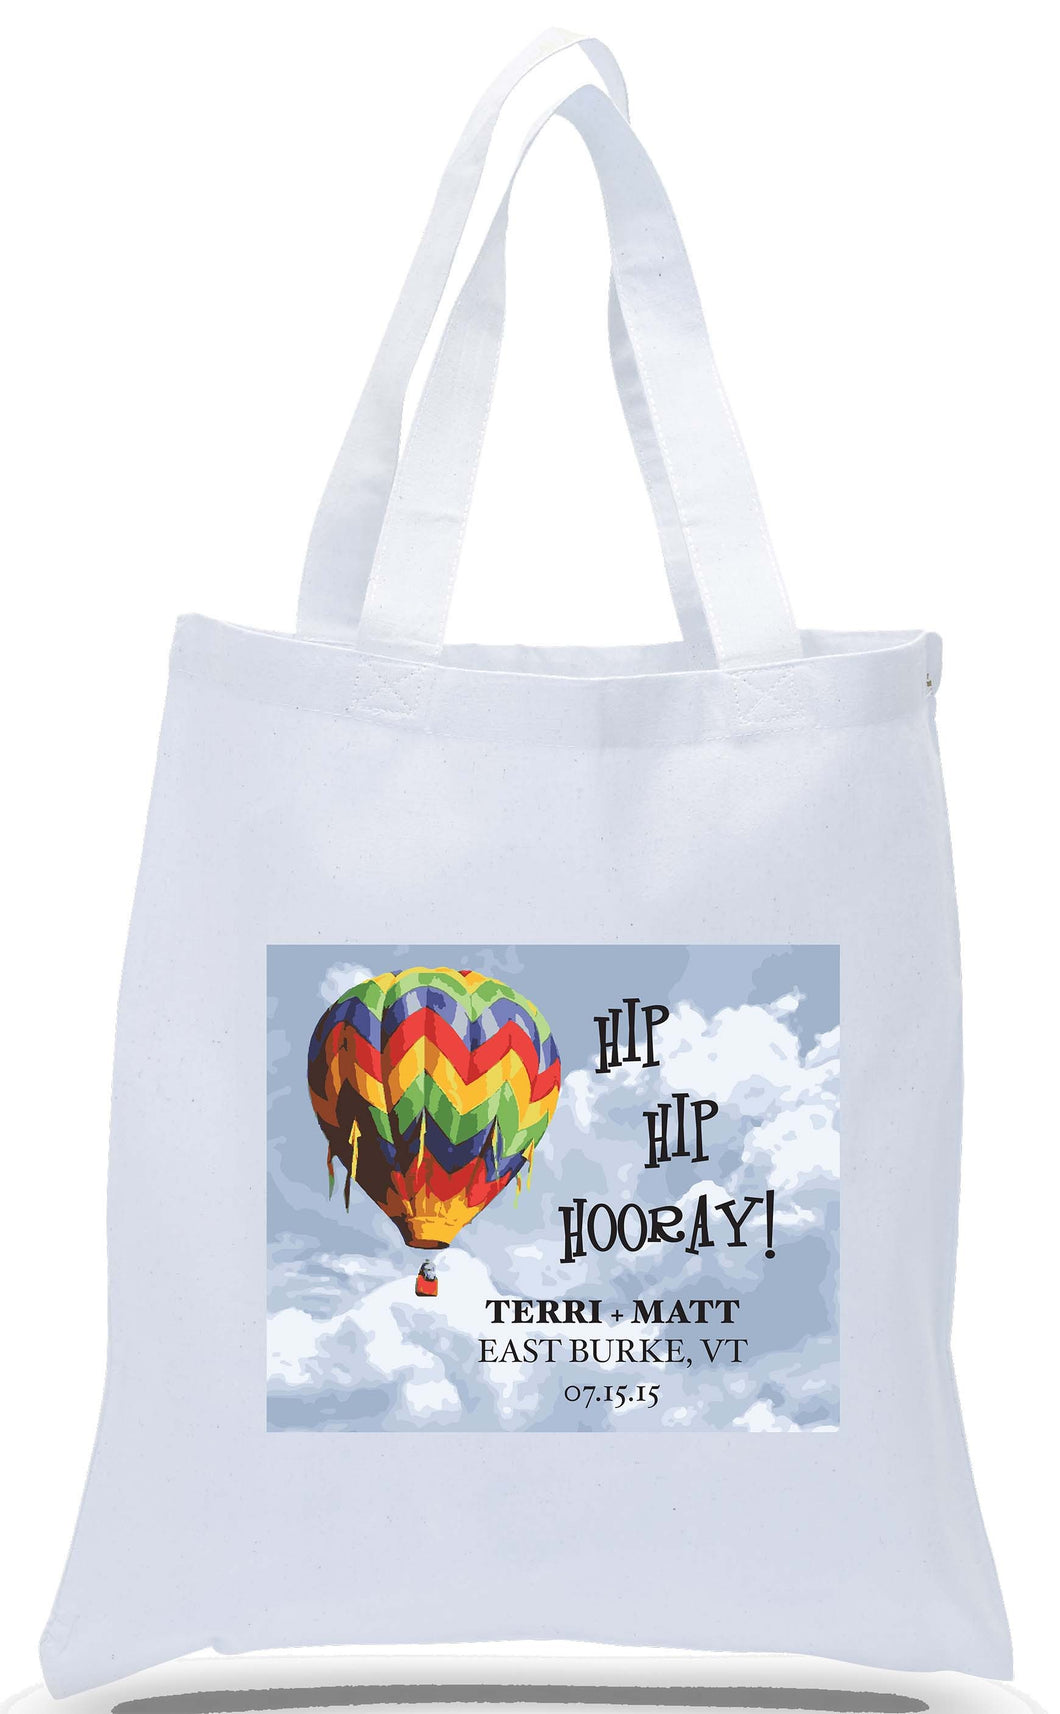 Wedding Welcome Tote with Hot Air Balloon, Also Great for Special Events, Customizes with Names, Location and Date for Just $3.99 Each!